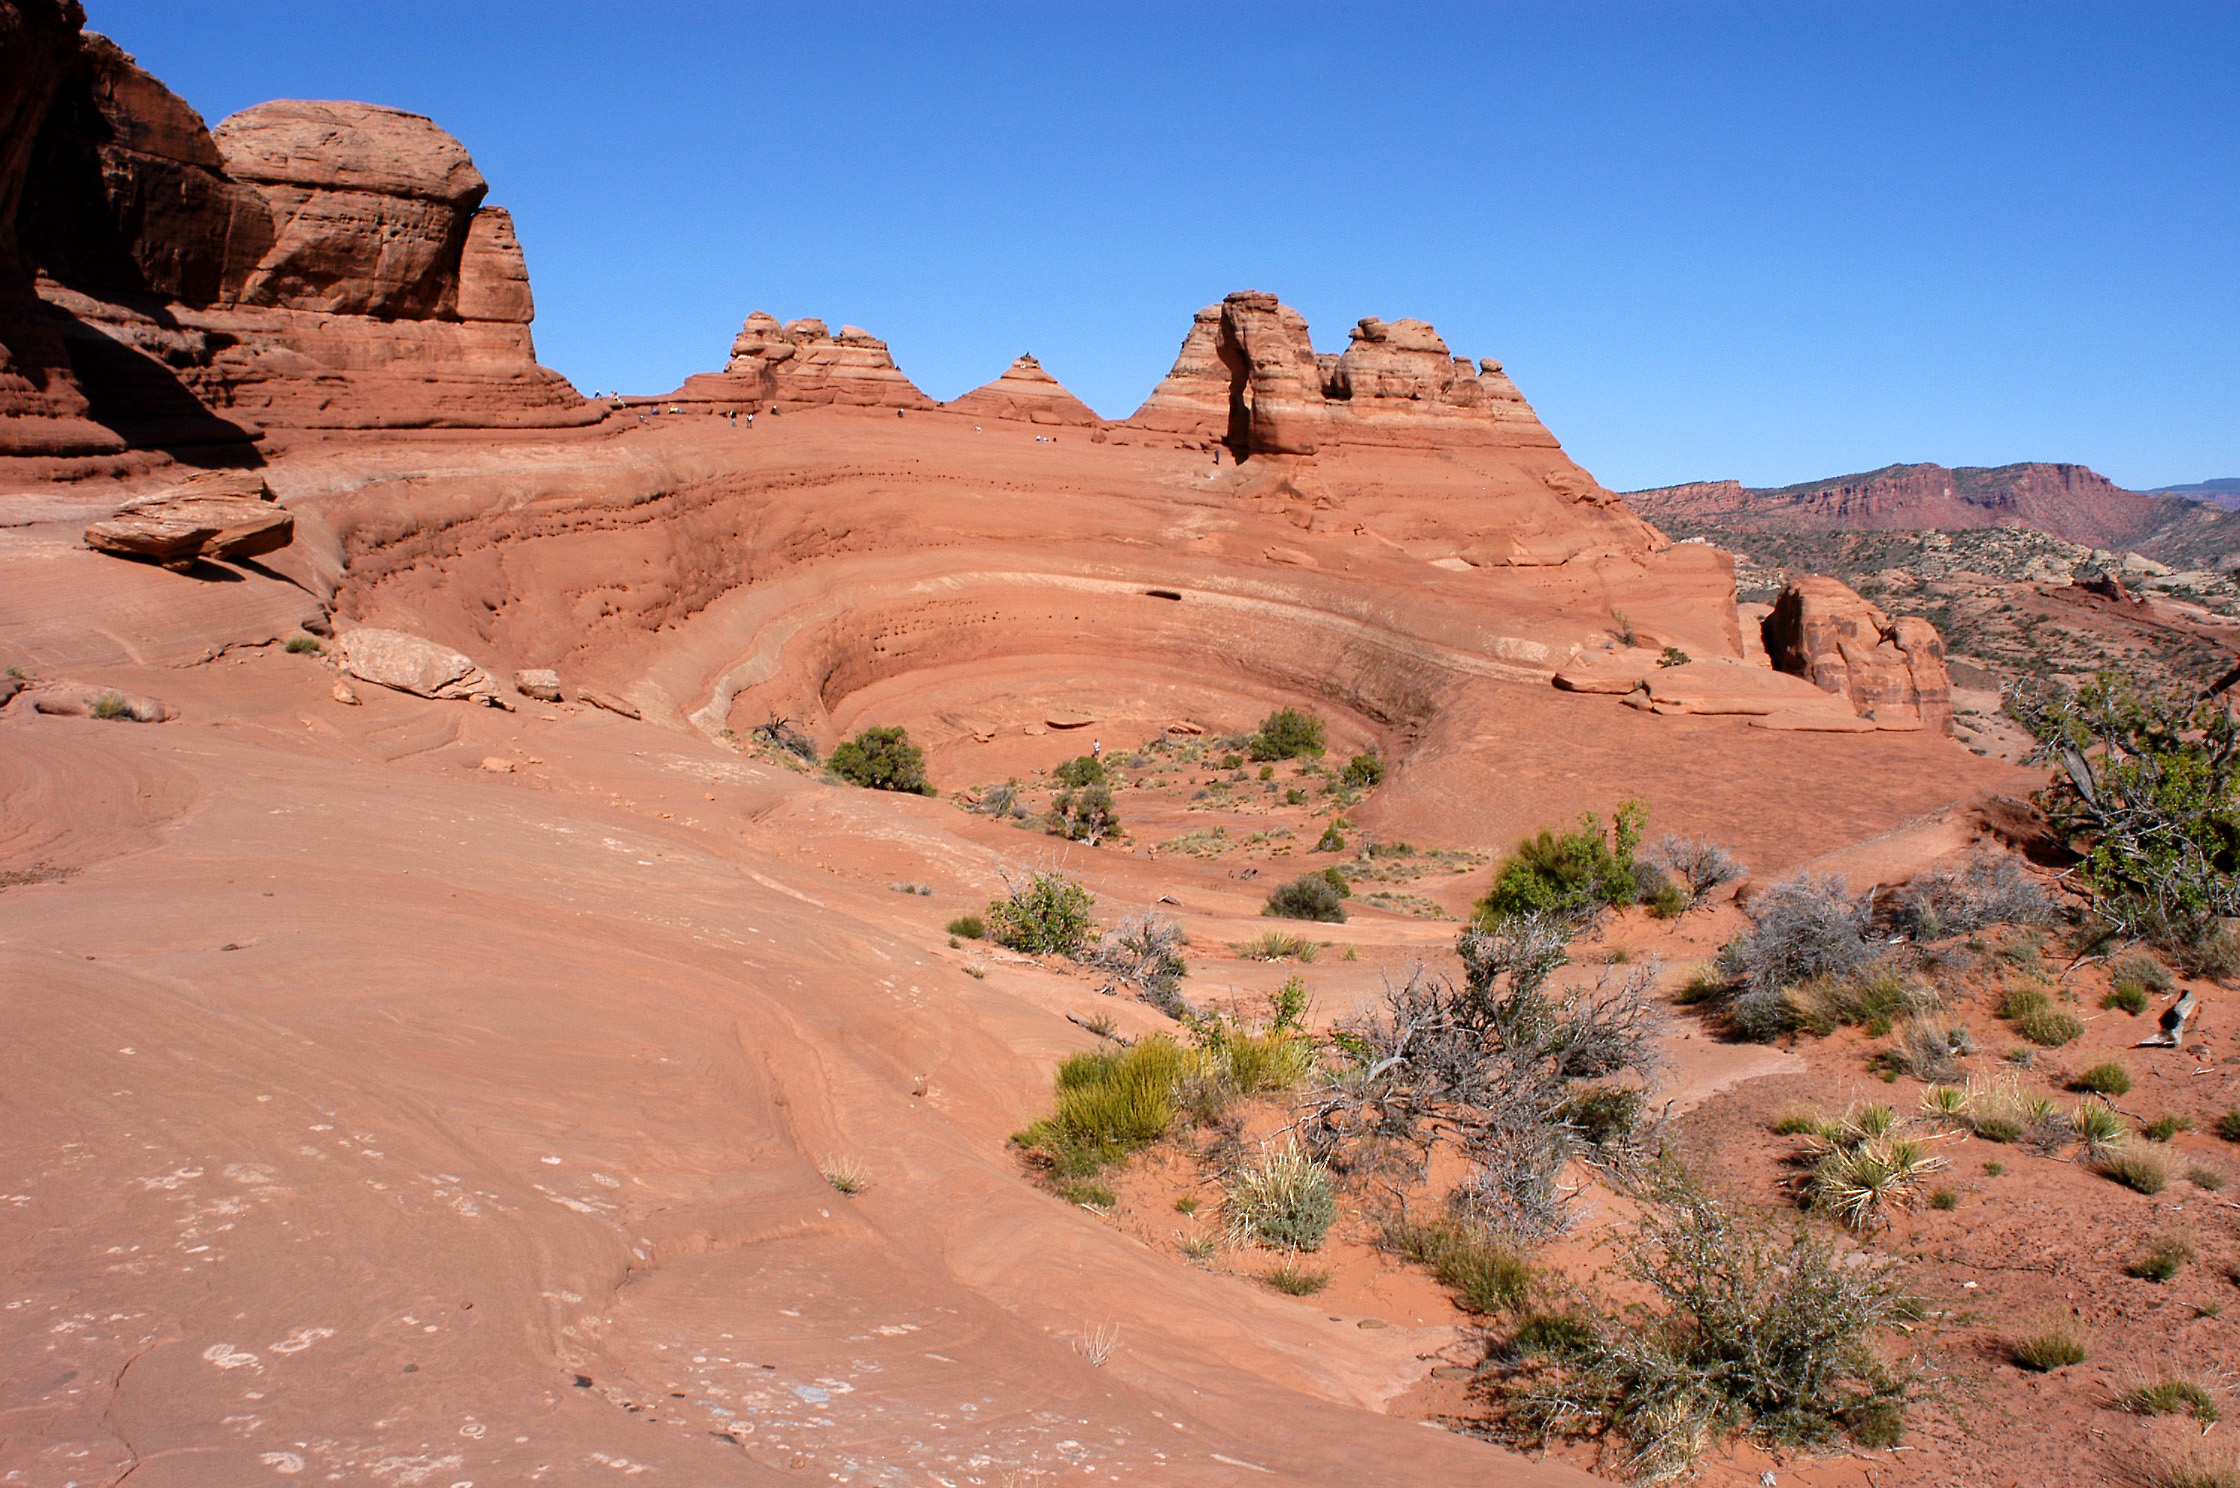 Looking east at Delicate Arch and its basin